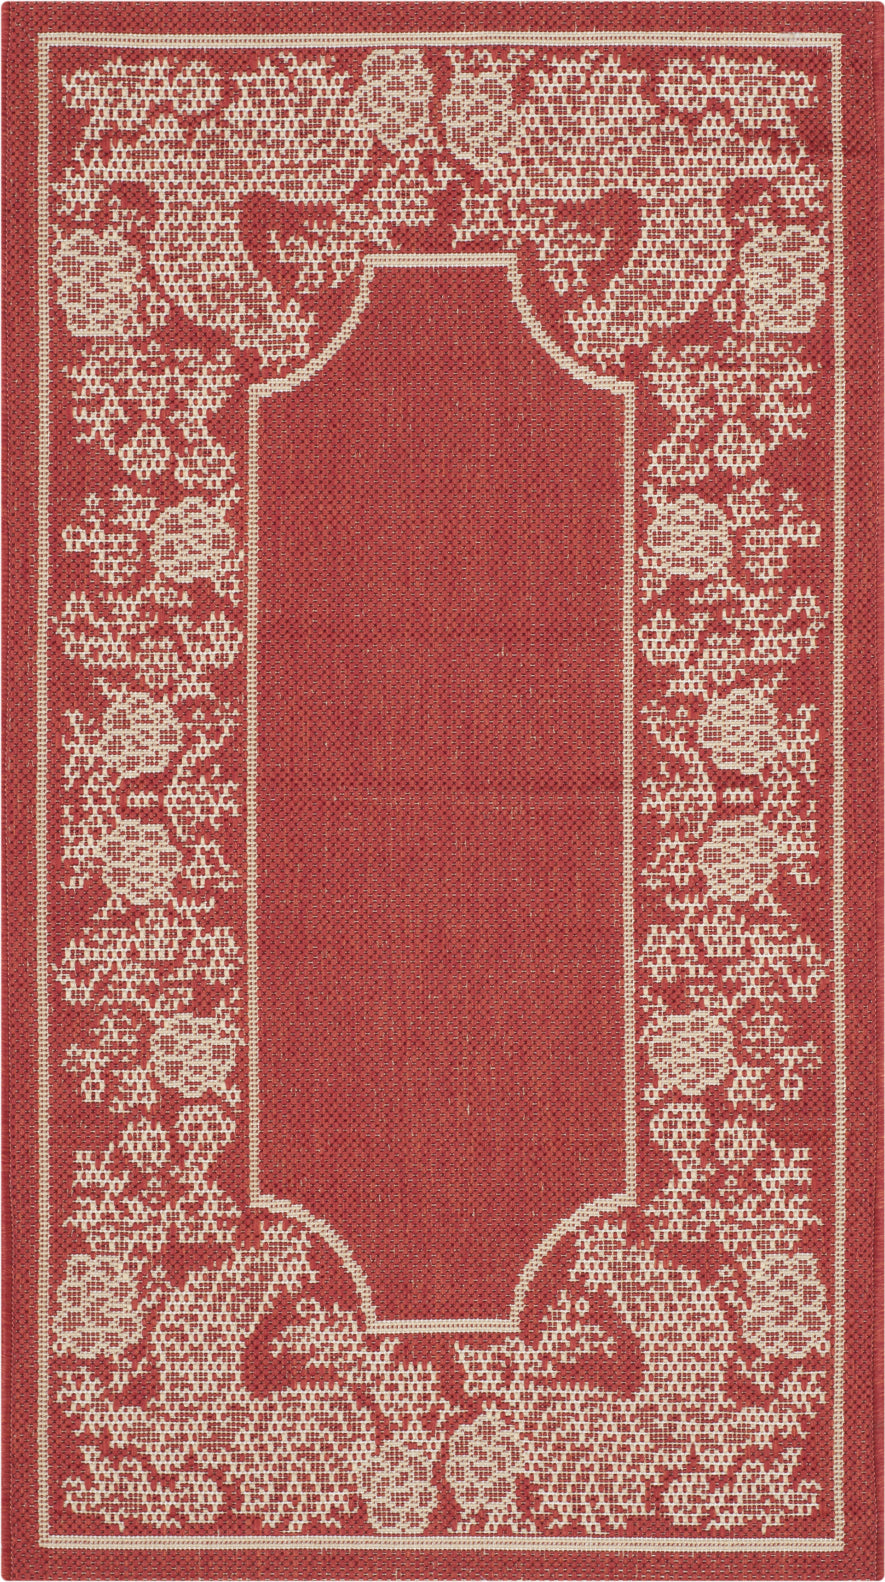 Safavieh Courtyard CY3305 Red/Natural Area Rug main image